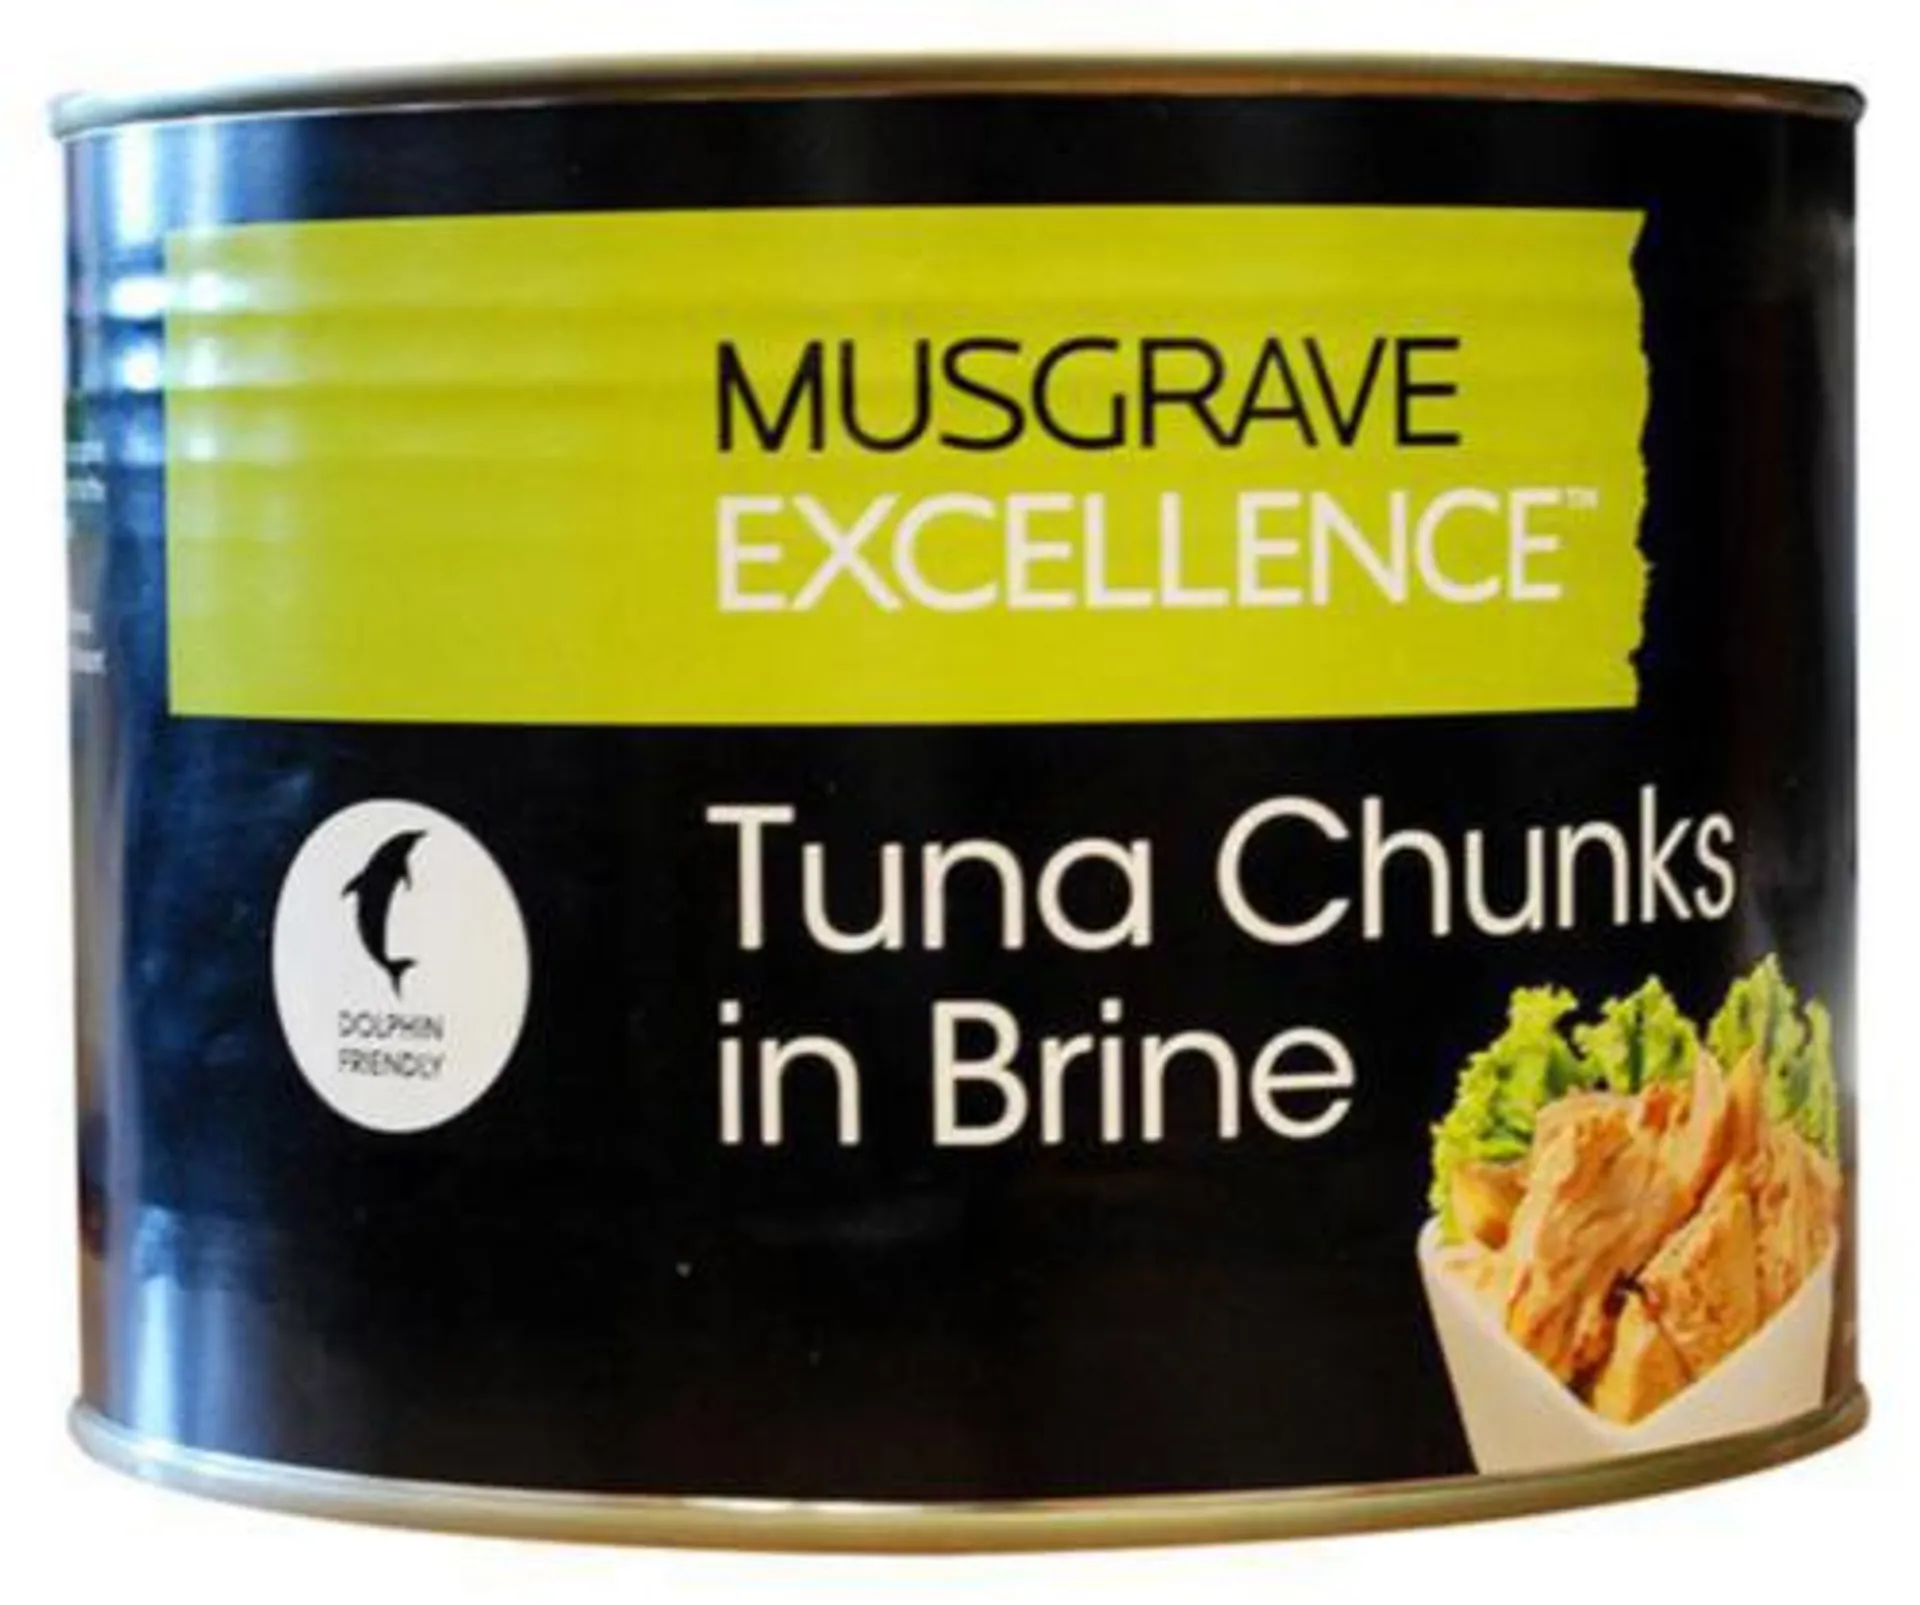 Musgrave Excellence Tuna Chunks in Brine